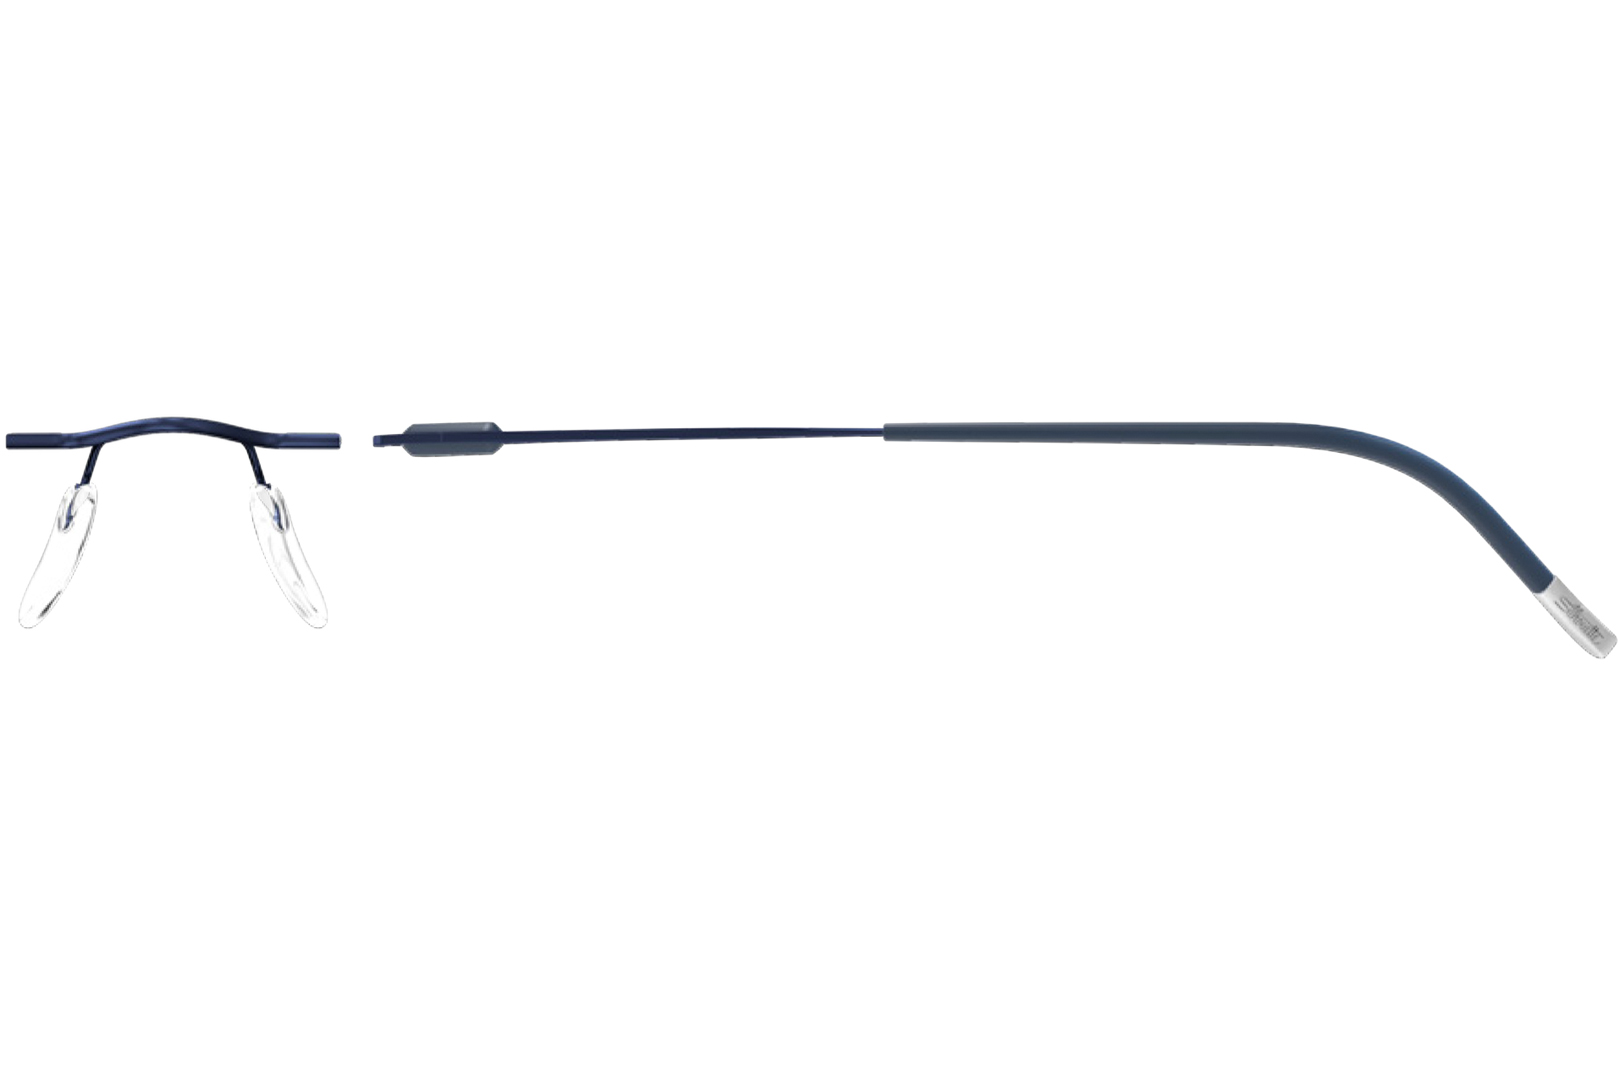 Silhouette Purist Chassis Eyeglasses 5561 Rimless Frame Trusty